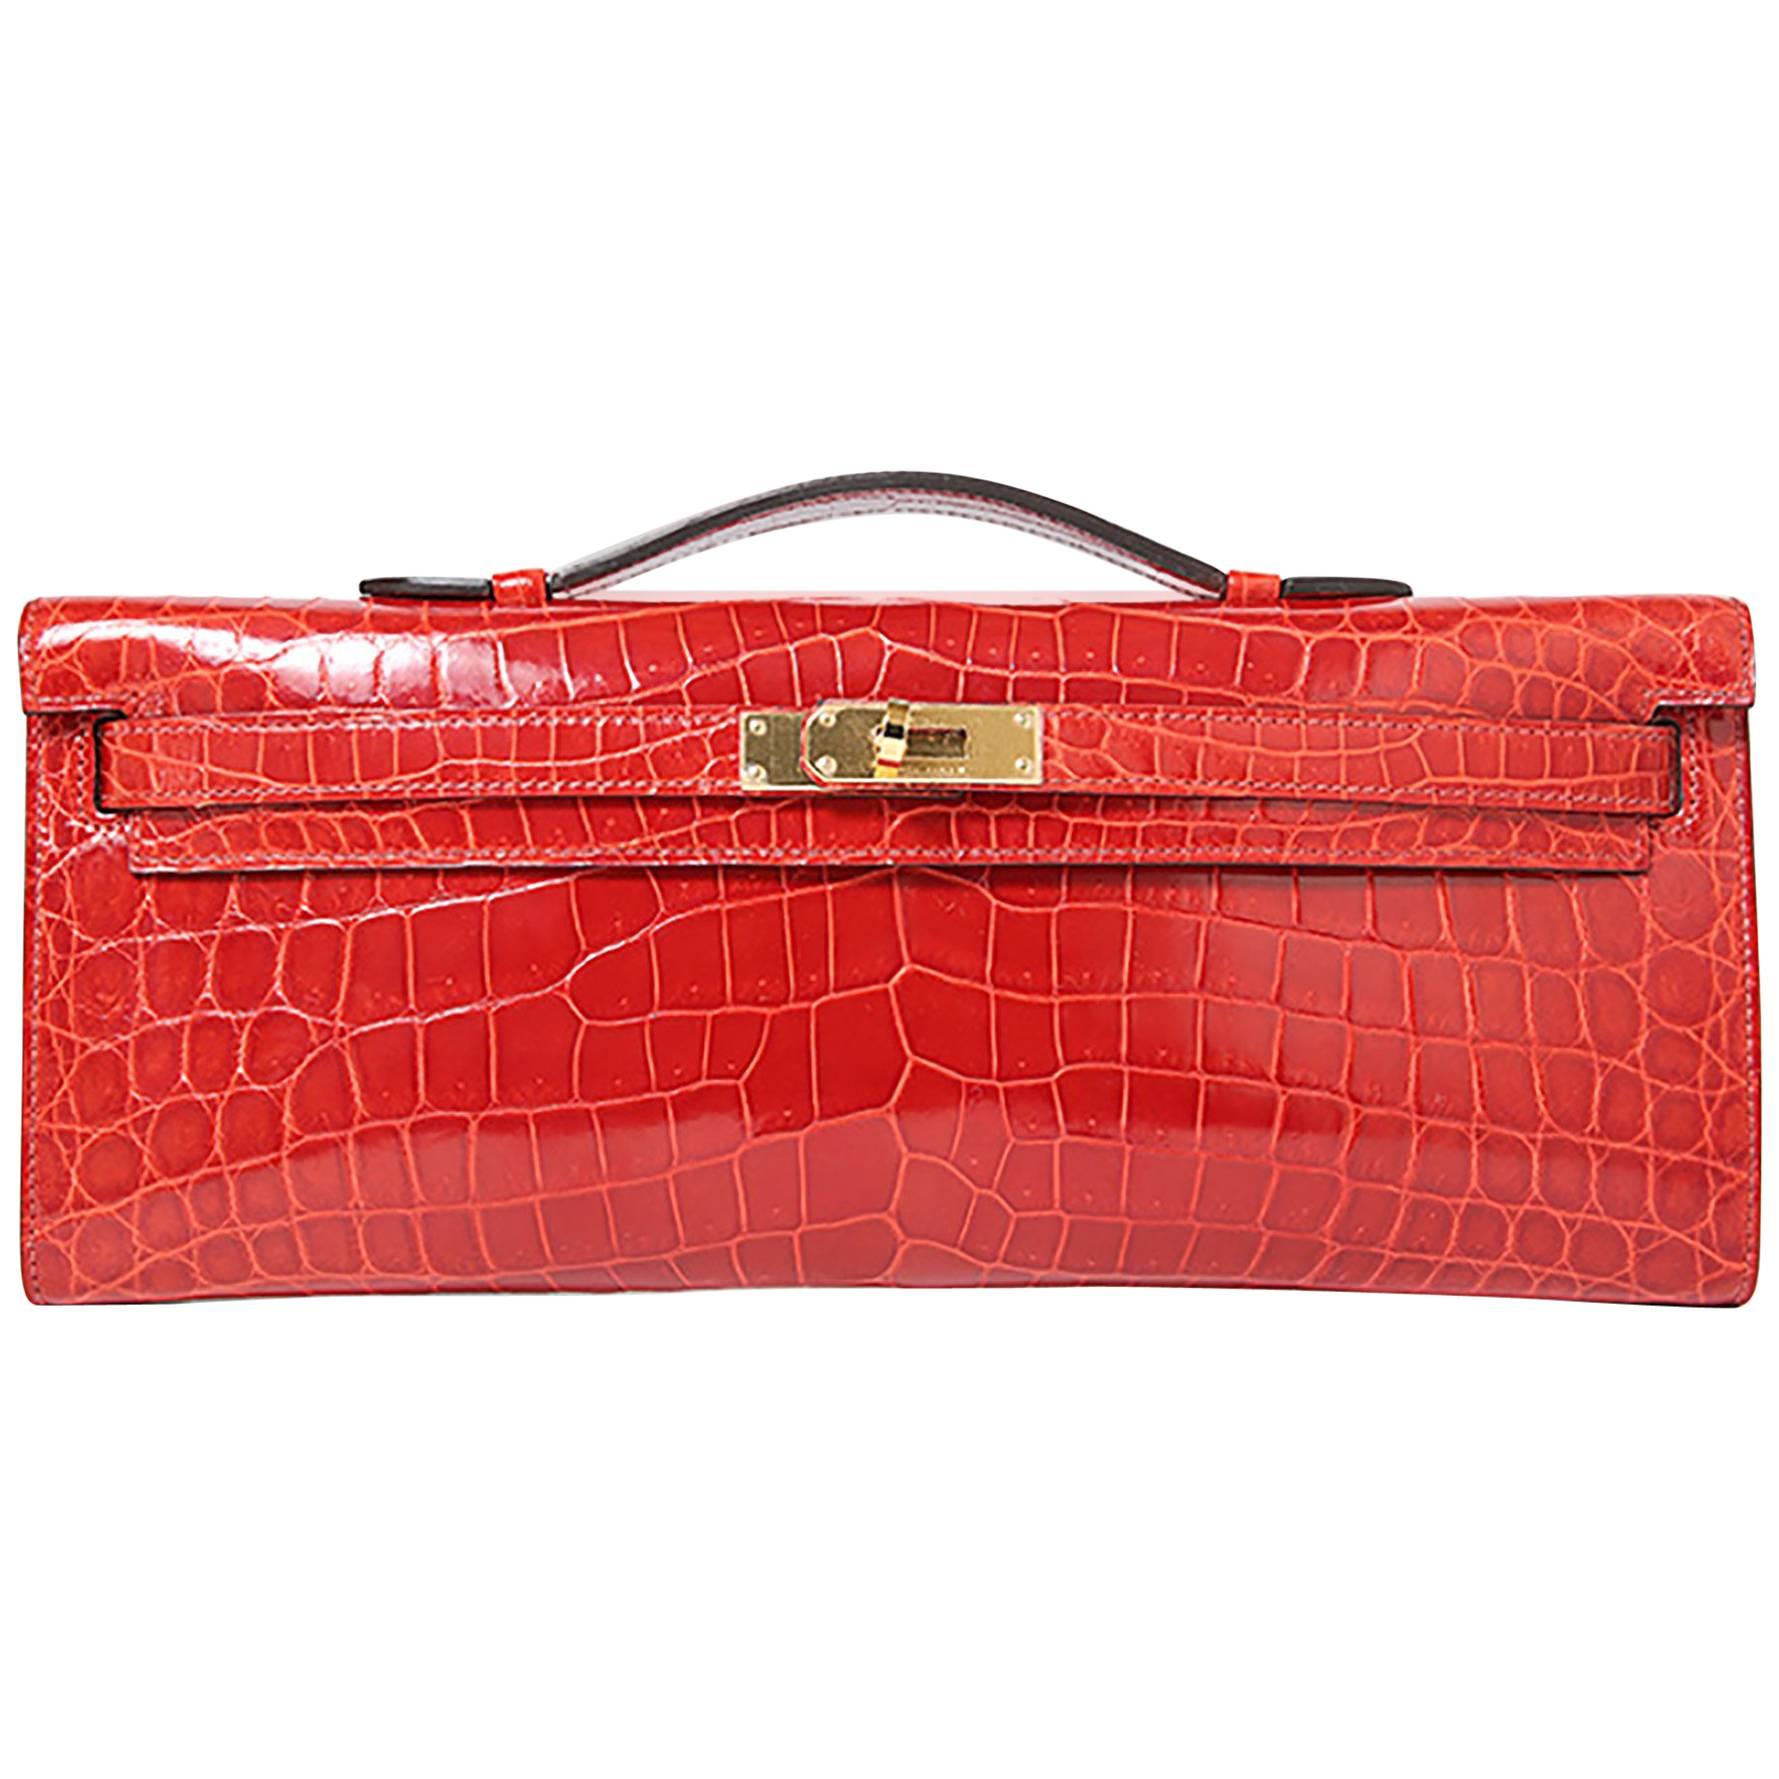 Hermes Kelly Cut Crocodilus Niloticus Leather Red Color GHW